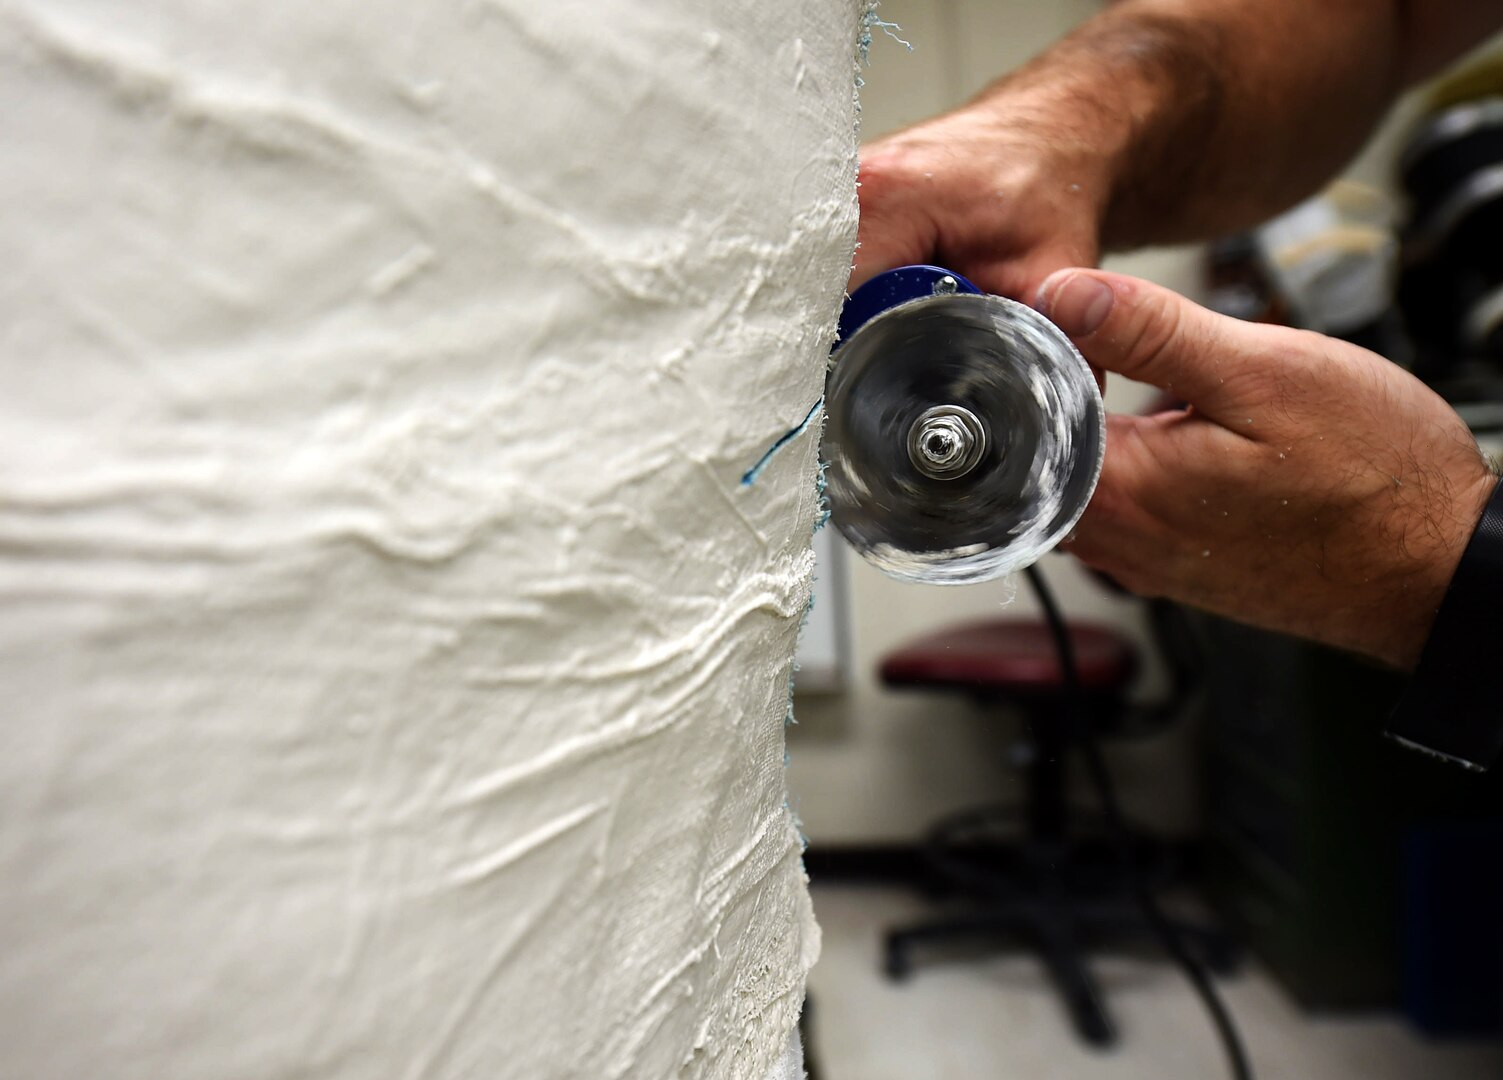 Staff Sgt. Devin Rudd, a student in the orthotics program, cuts through a plaster mold of a body jacket orthoses at the Wilford Hall Ambulatory Surgical Center, Joint Base San Antonio-Lackland, Texas, Aug. 24, 2016. As part of his training to become an orthotics technician, Rudd must learn how the process of fabricating various types of orthoses. (U.S. Air Force photo/Staff Sgt. Jerilyn Quintanilla)